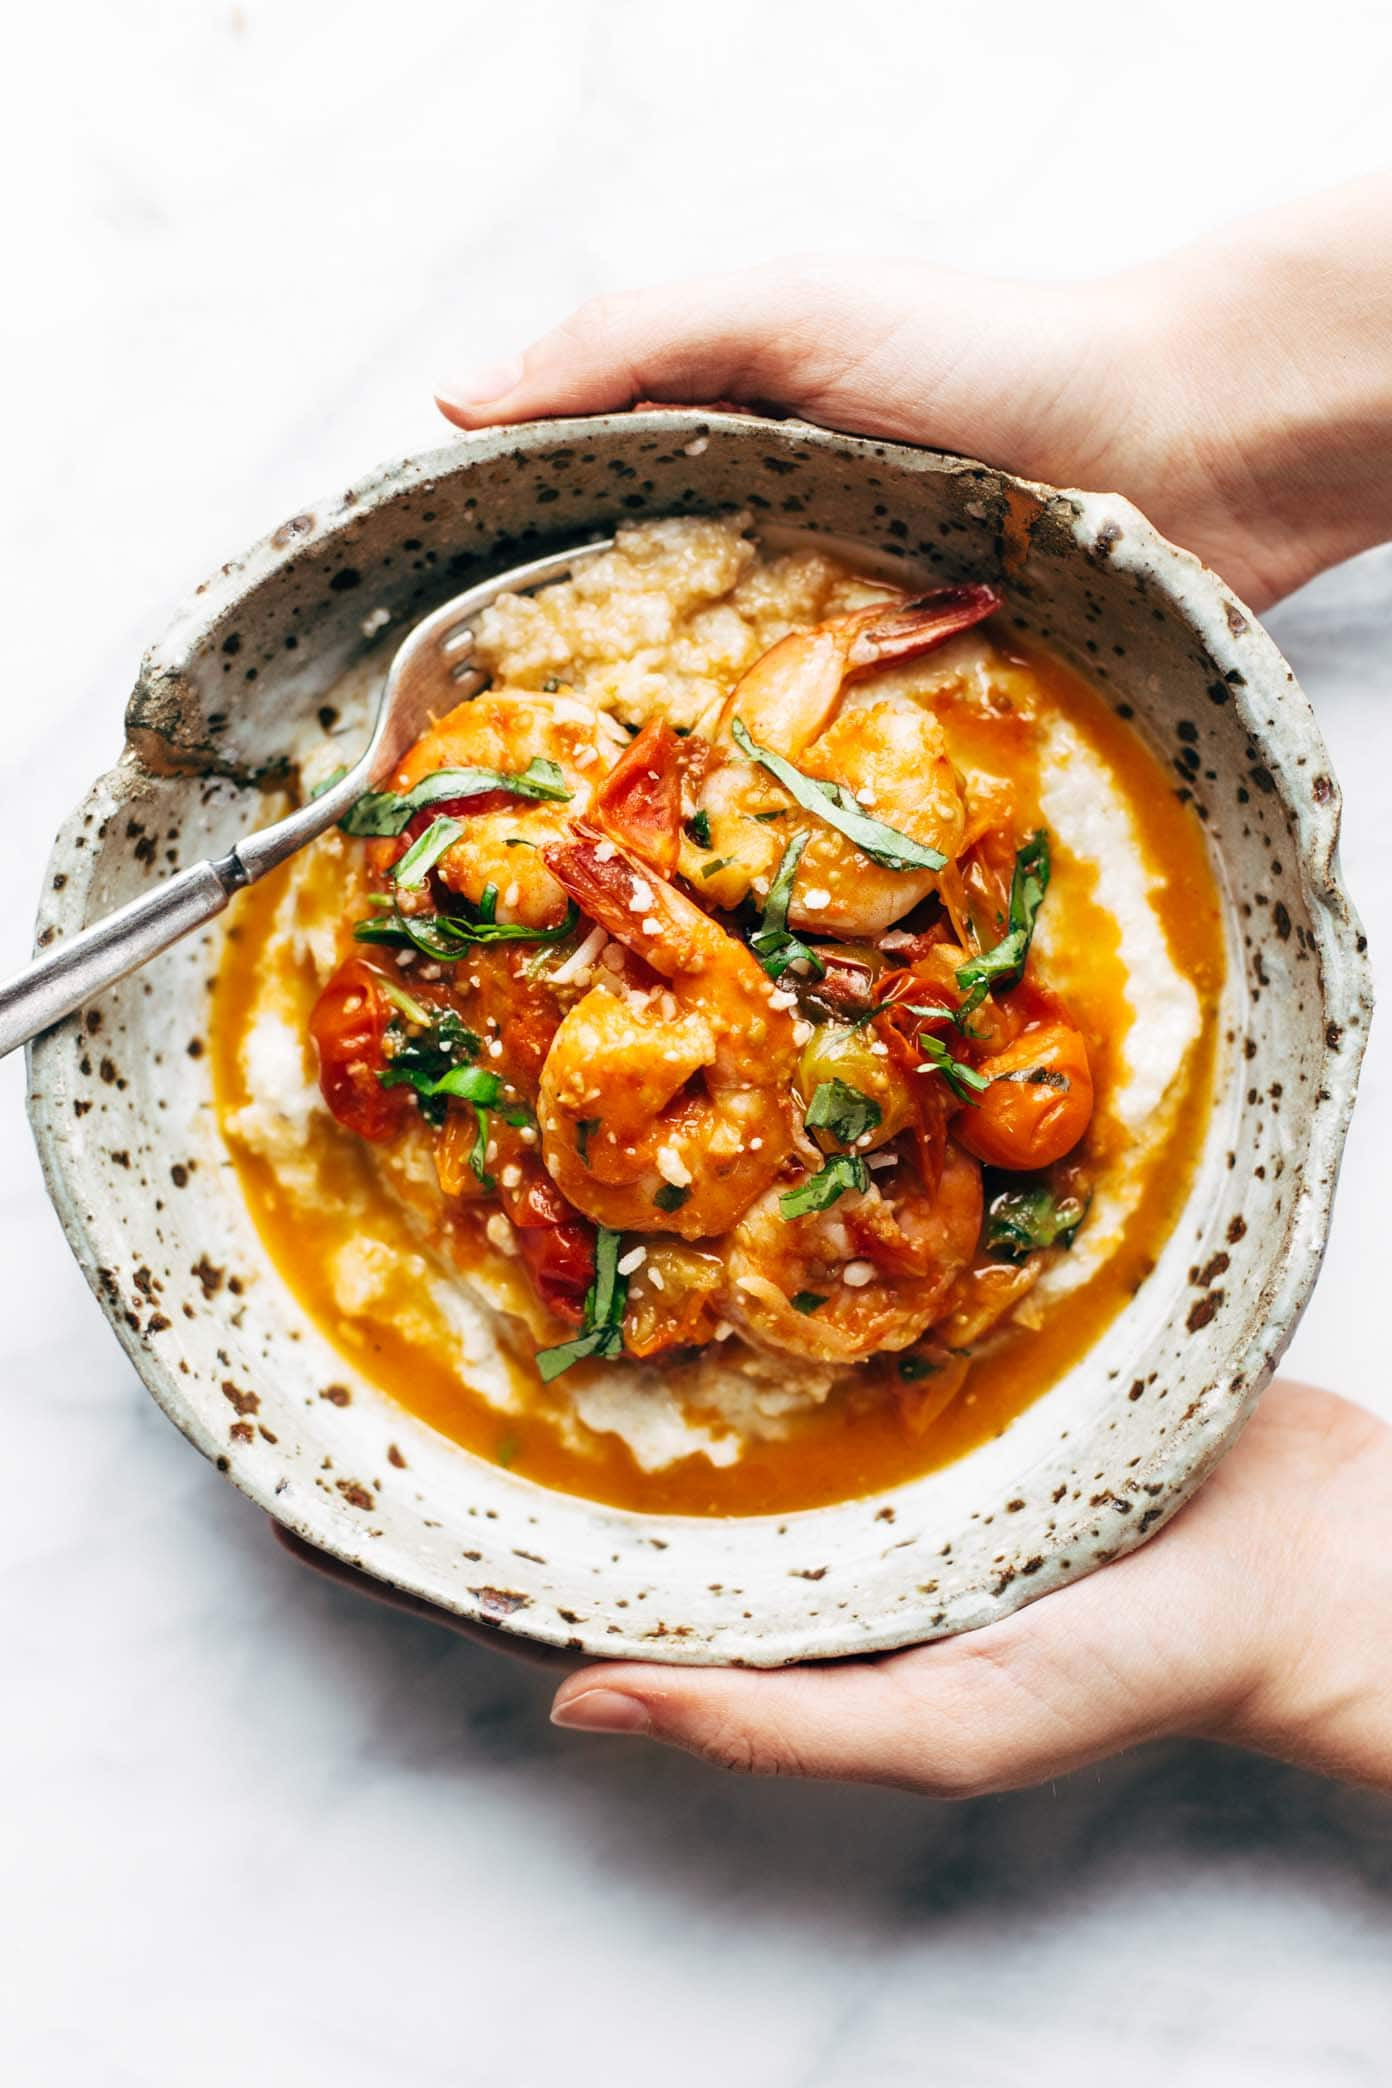 Recipe For Shrimp And Grits
 Garlic Basil Shrimp and Grits Recipe Pinch of Yum